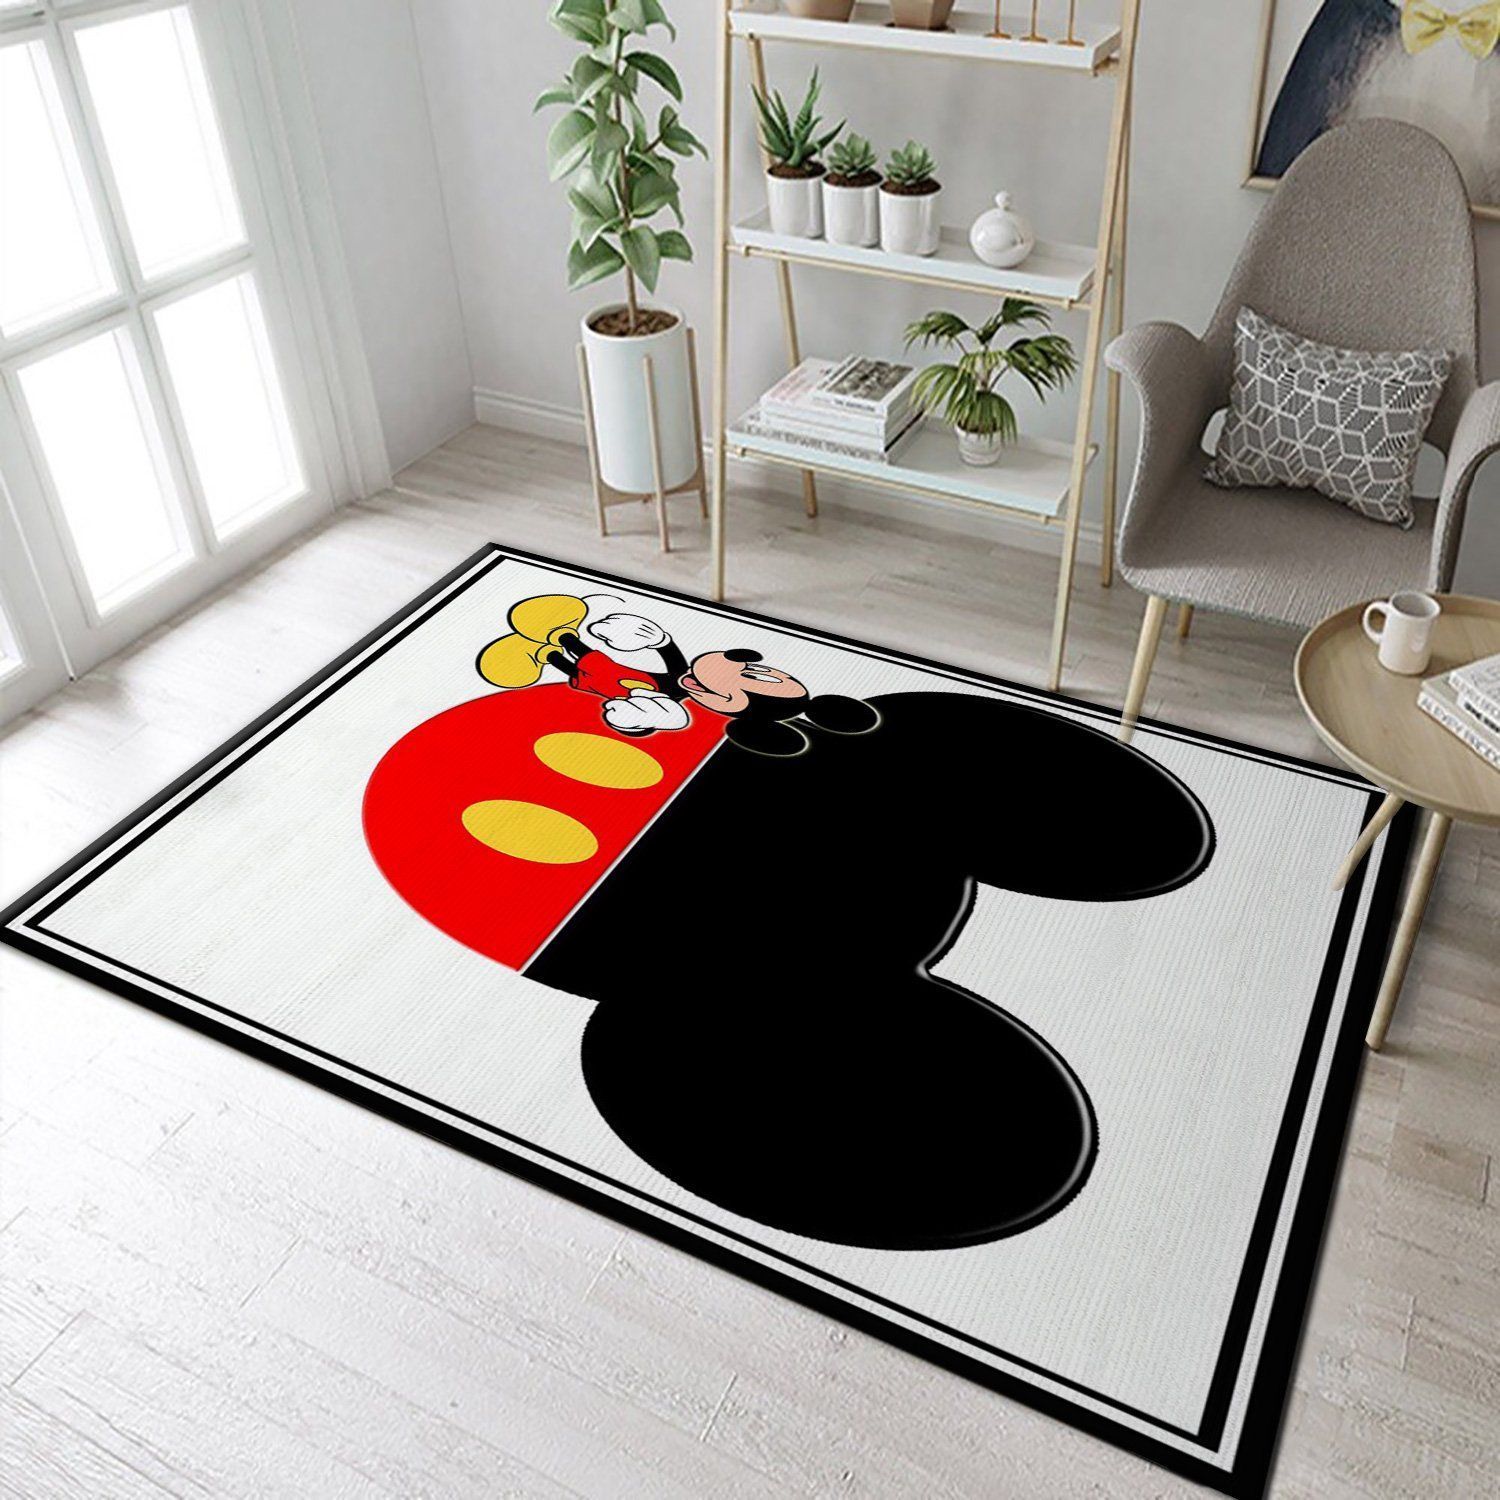 MICKEY MOUSE HEAD PATTERN4 AREA RUG FOR CHRISTMAS LIVING ROOM AND BEDROOM RUG US GIFT DECOR 180222